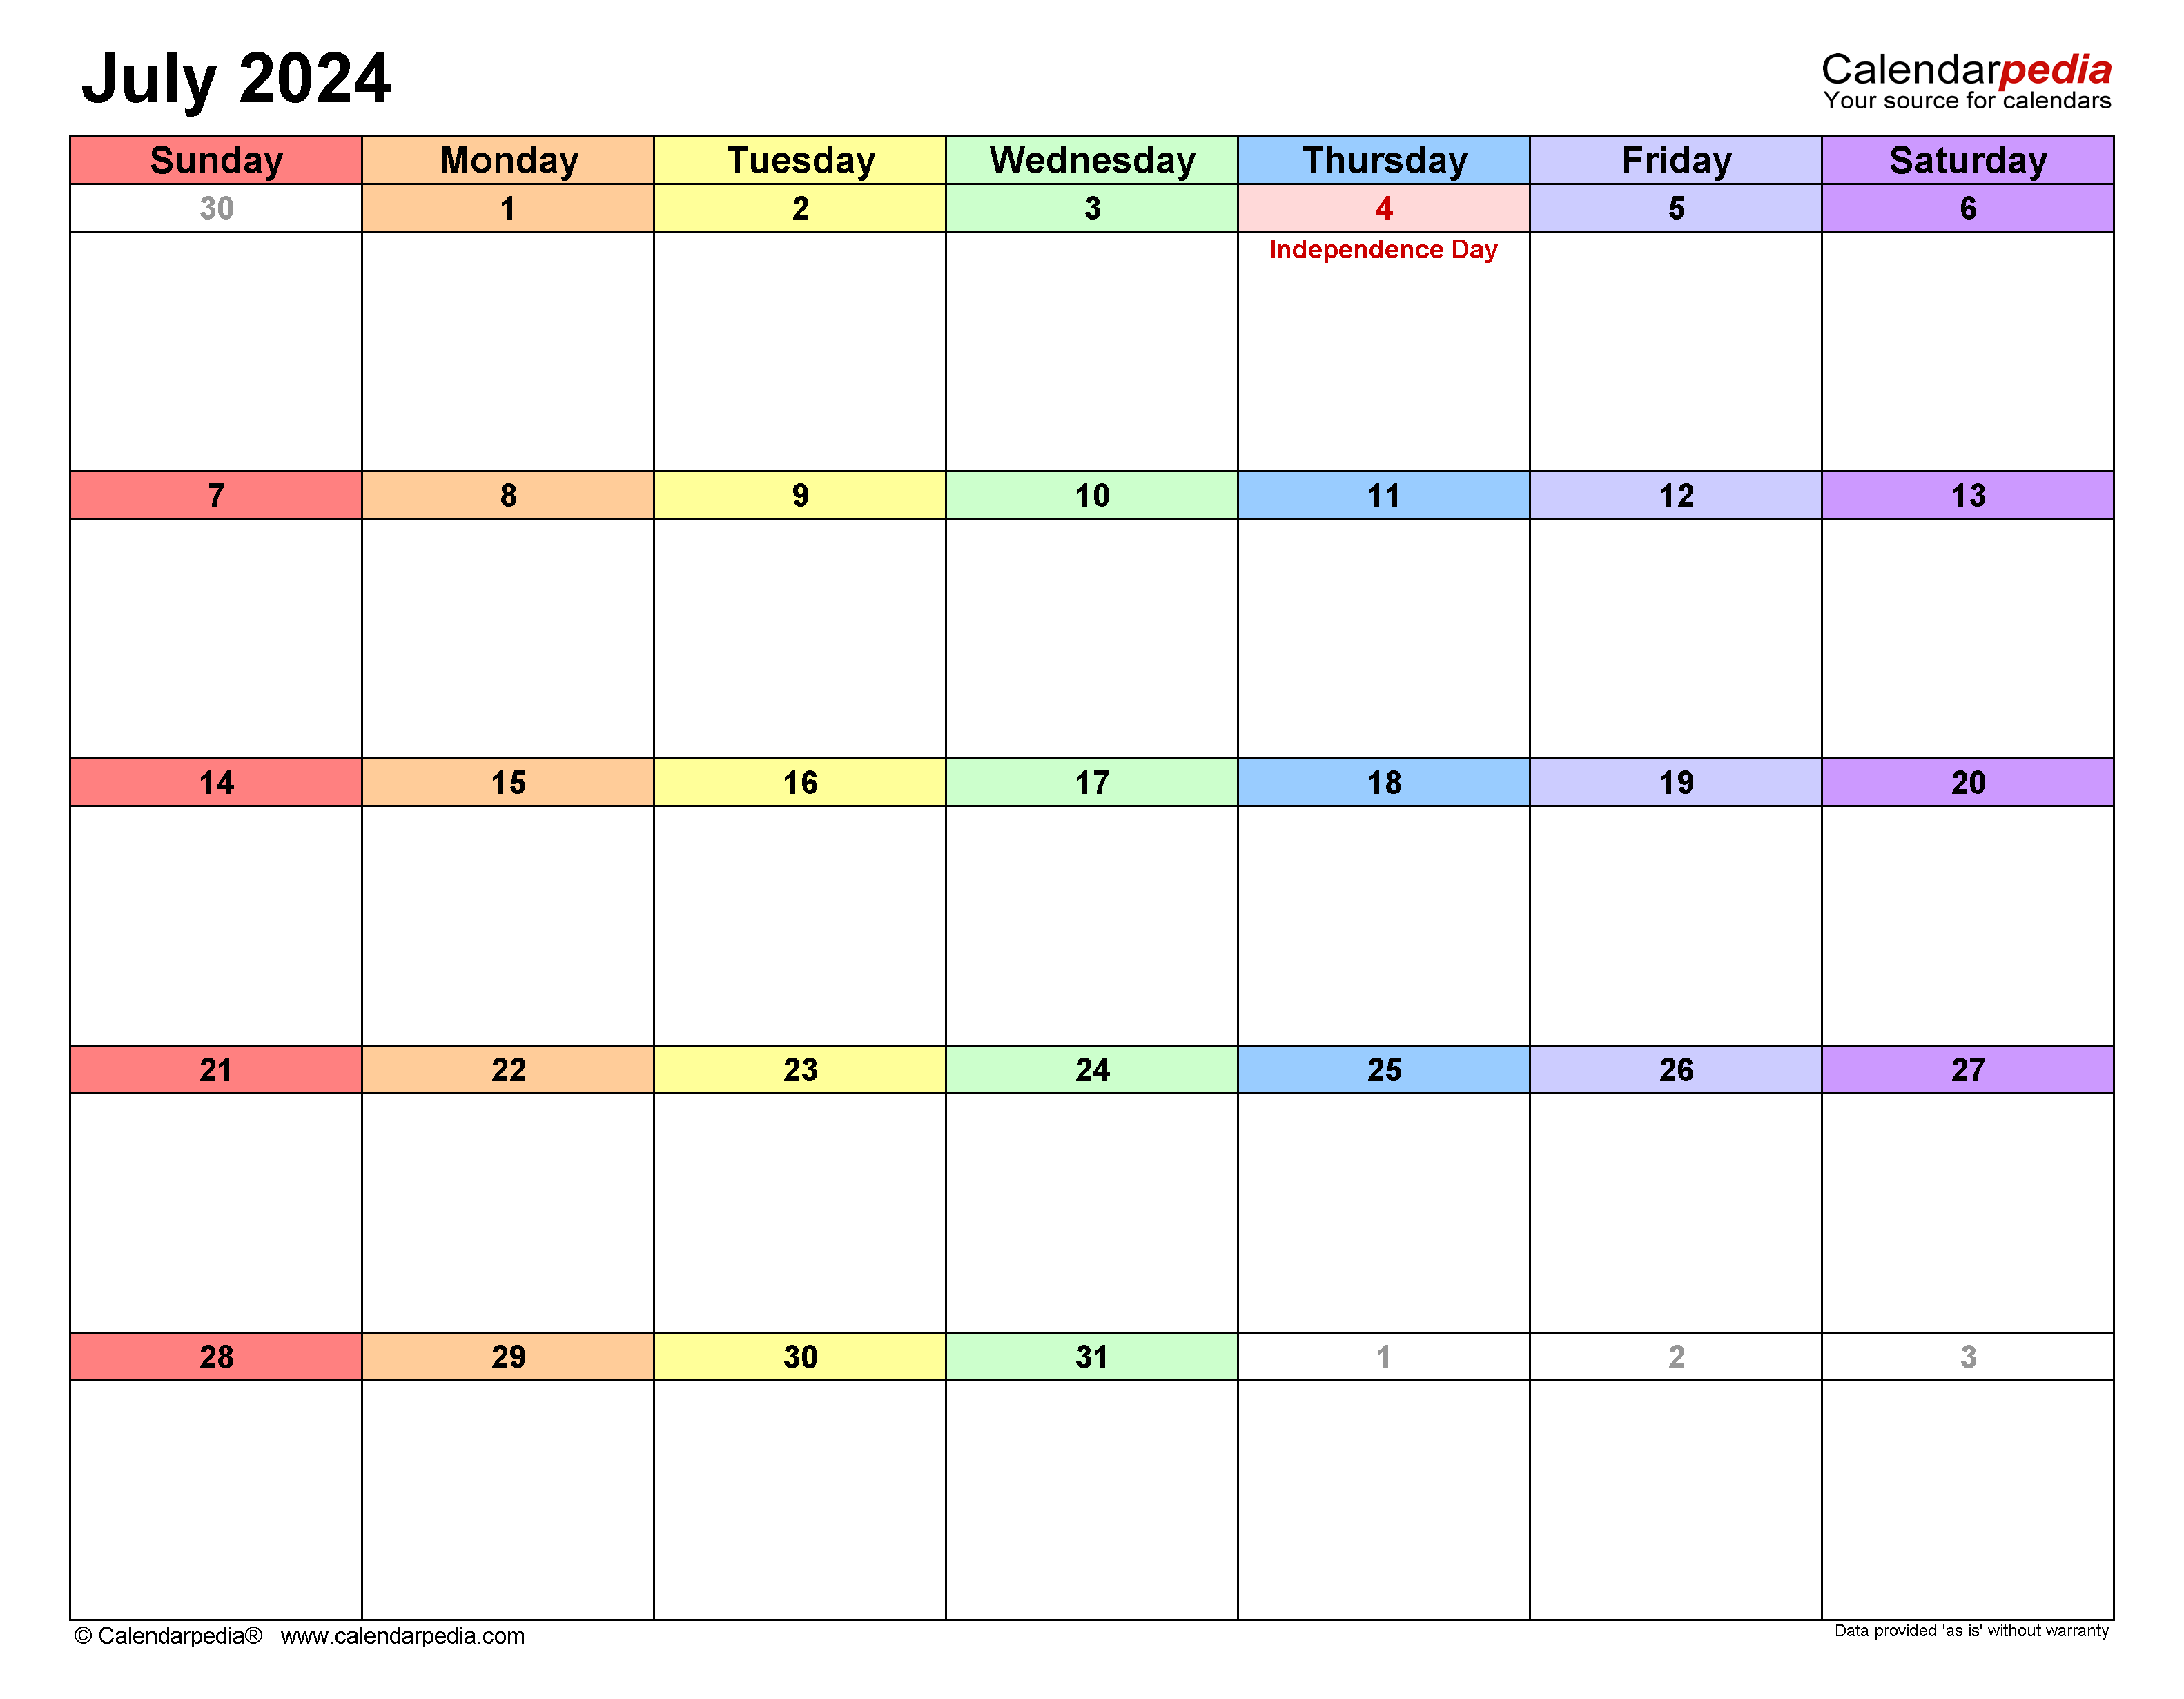 July 2024 Calendar | Templates For Word, Excel And Pdf within July 2024 Calendar Excel